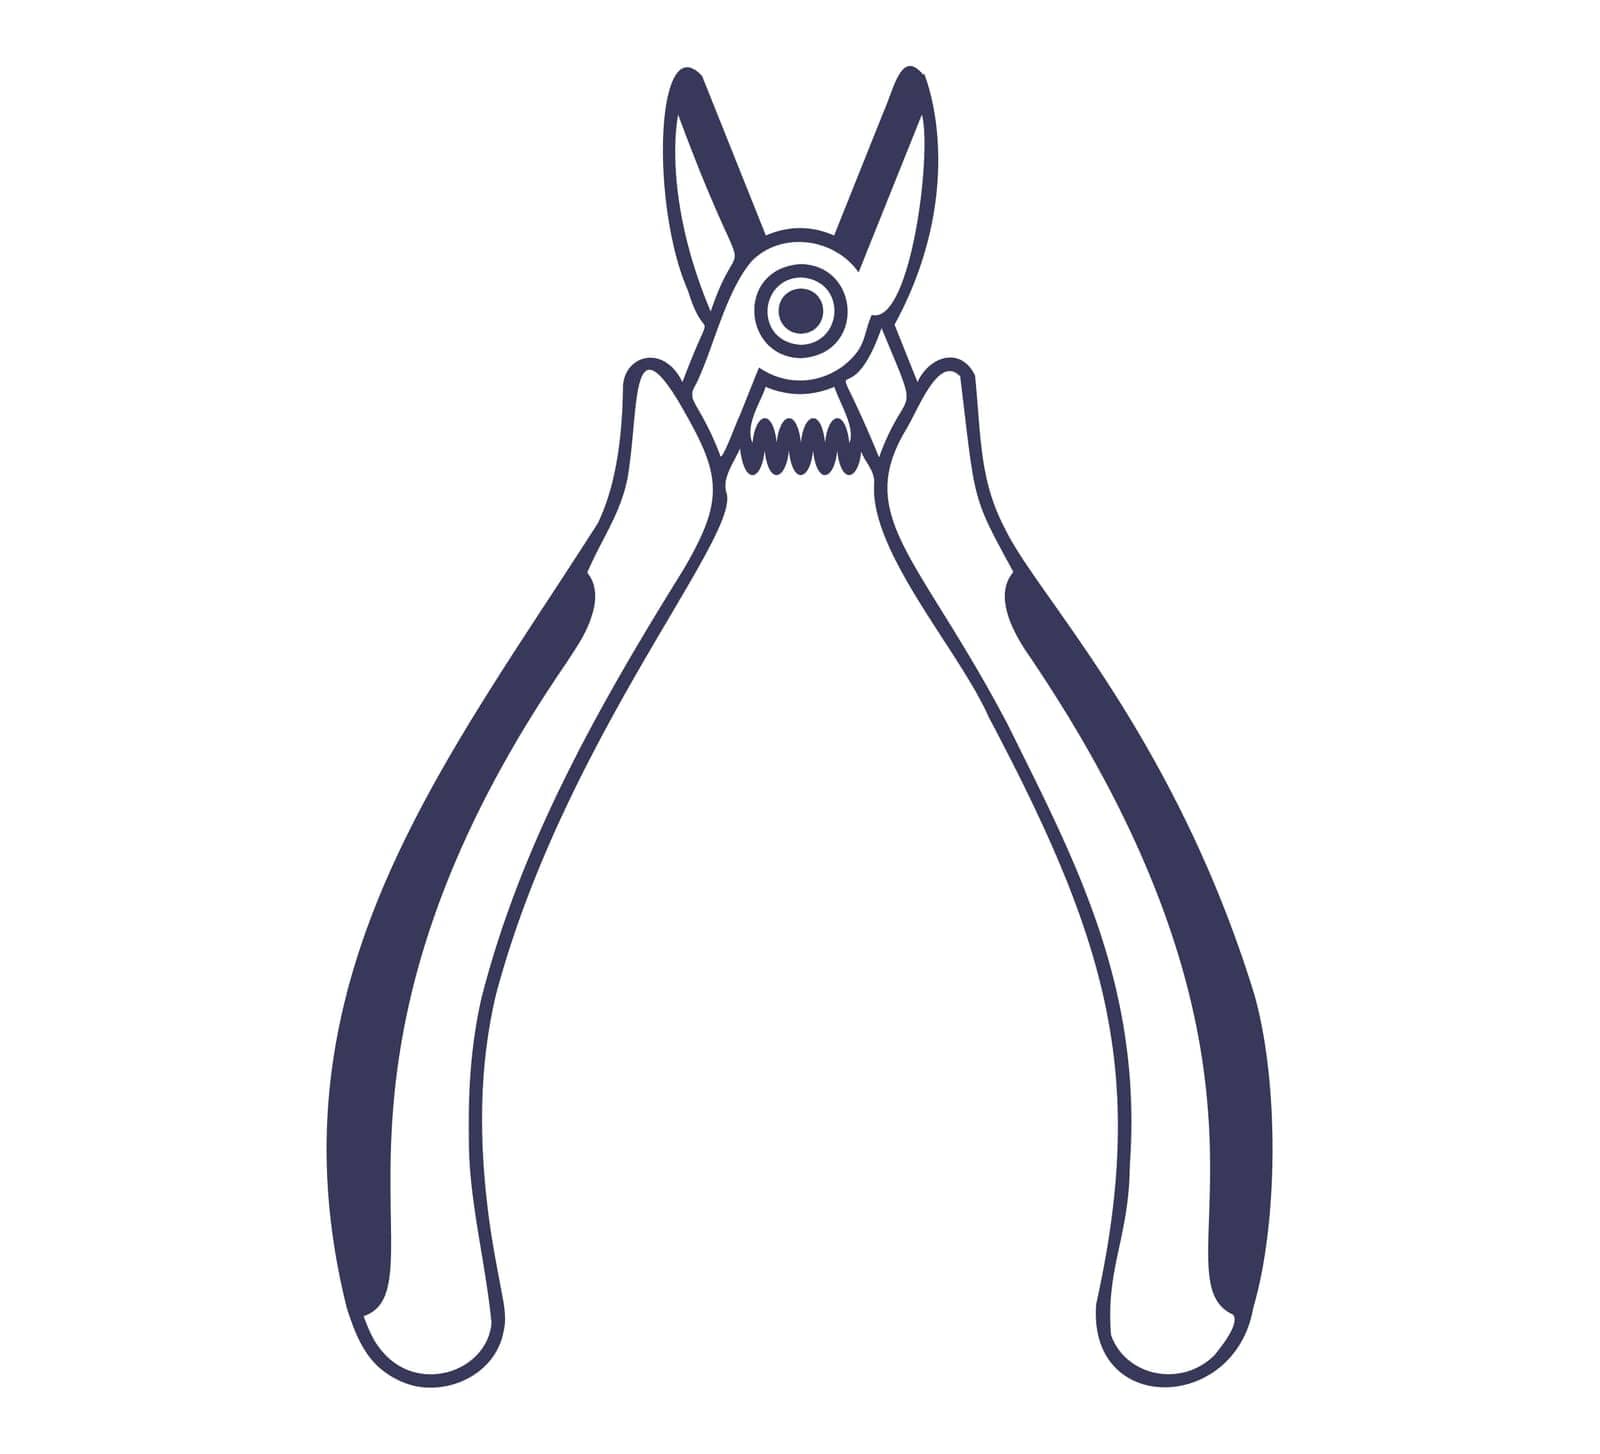 wire cutter tool icon for cutting wires. by PlutusART